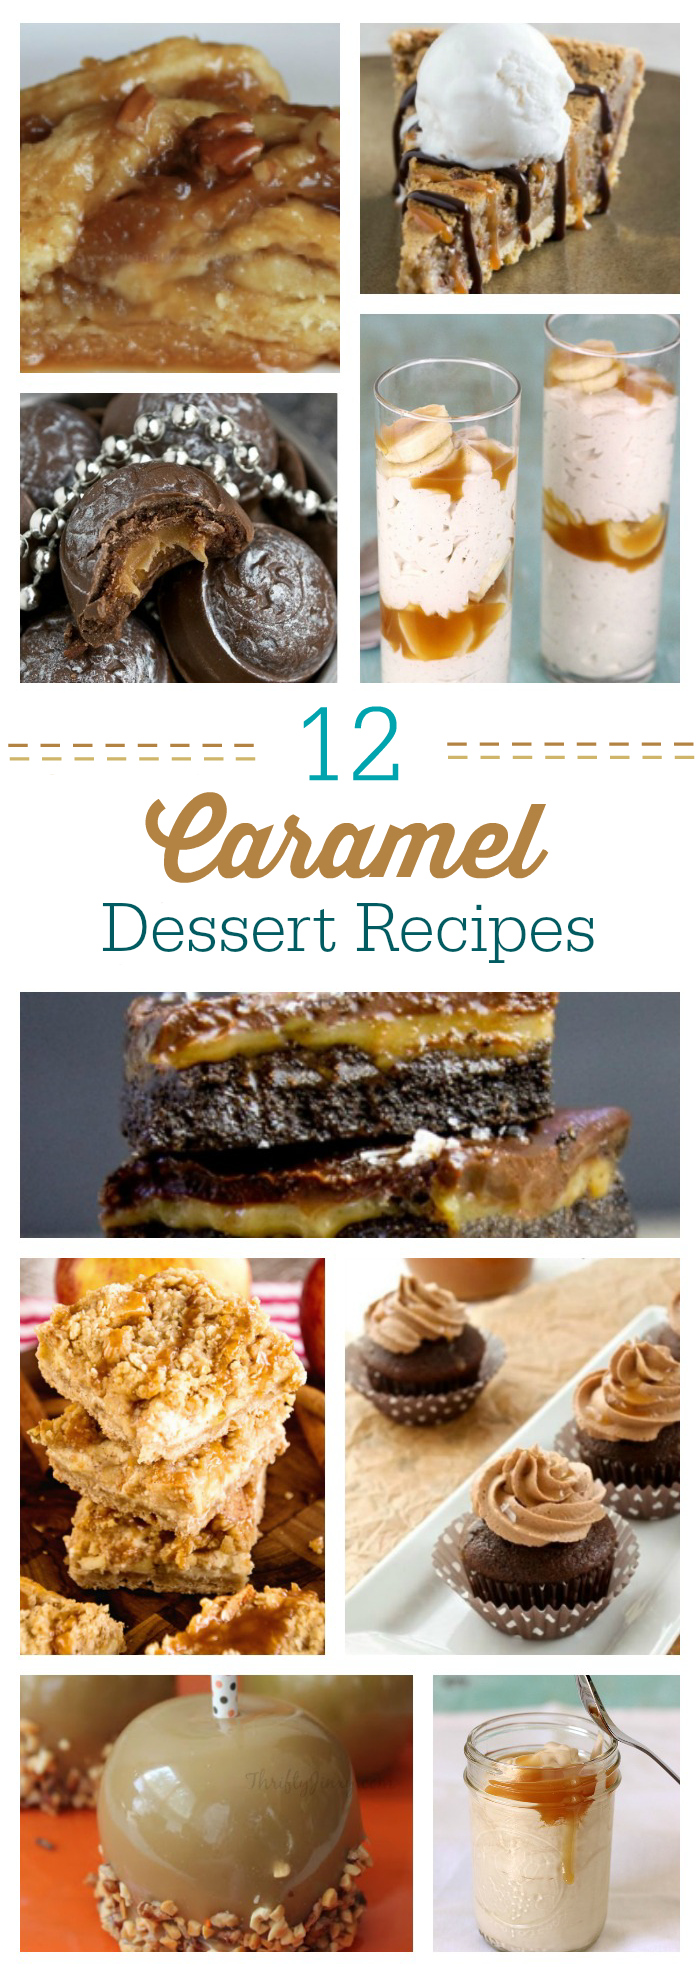 I LOVE Caramel! That is all! I need these recipes in my life. Every last one of them.